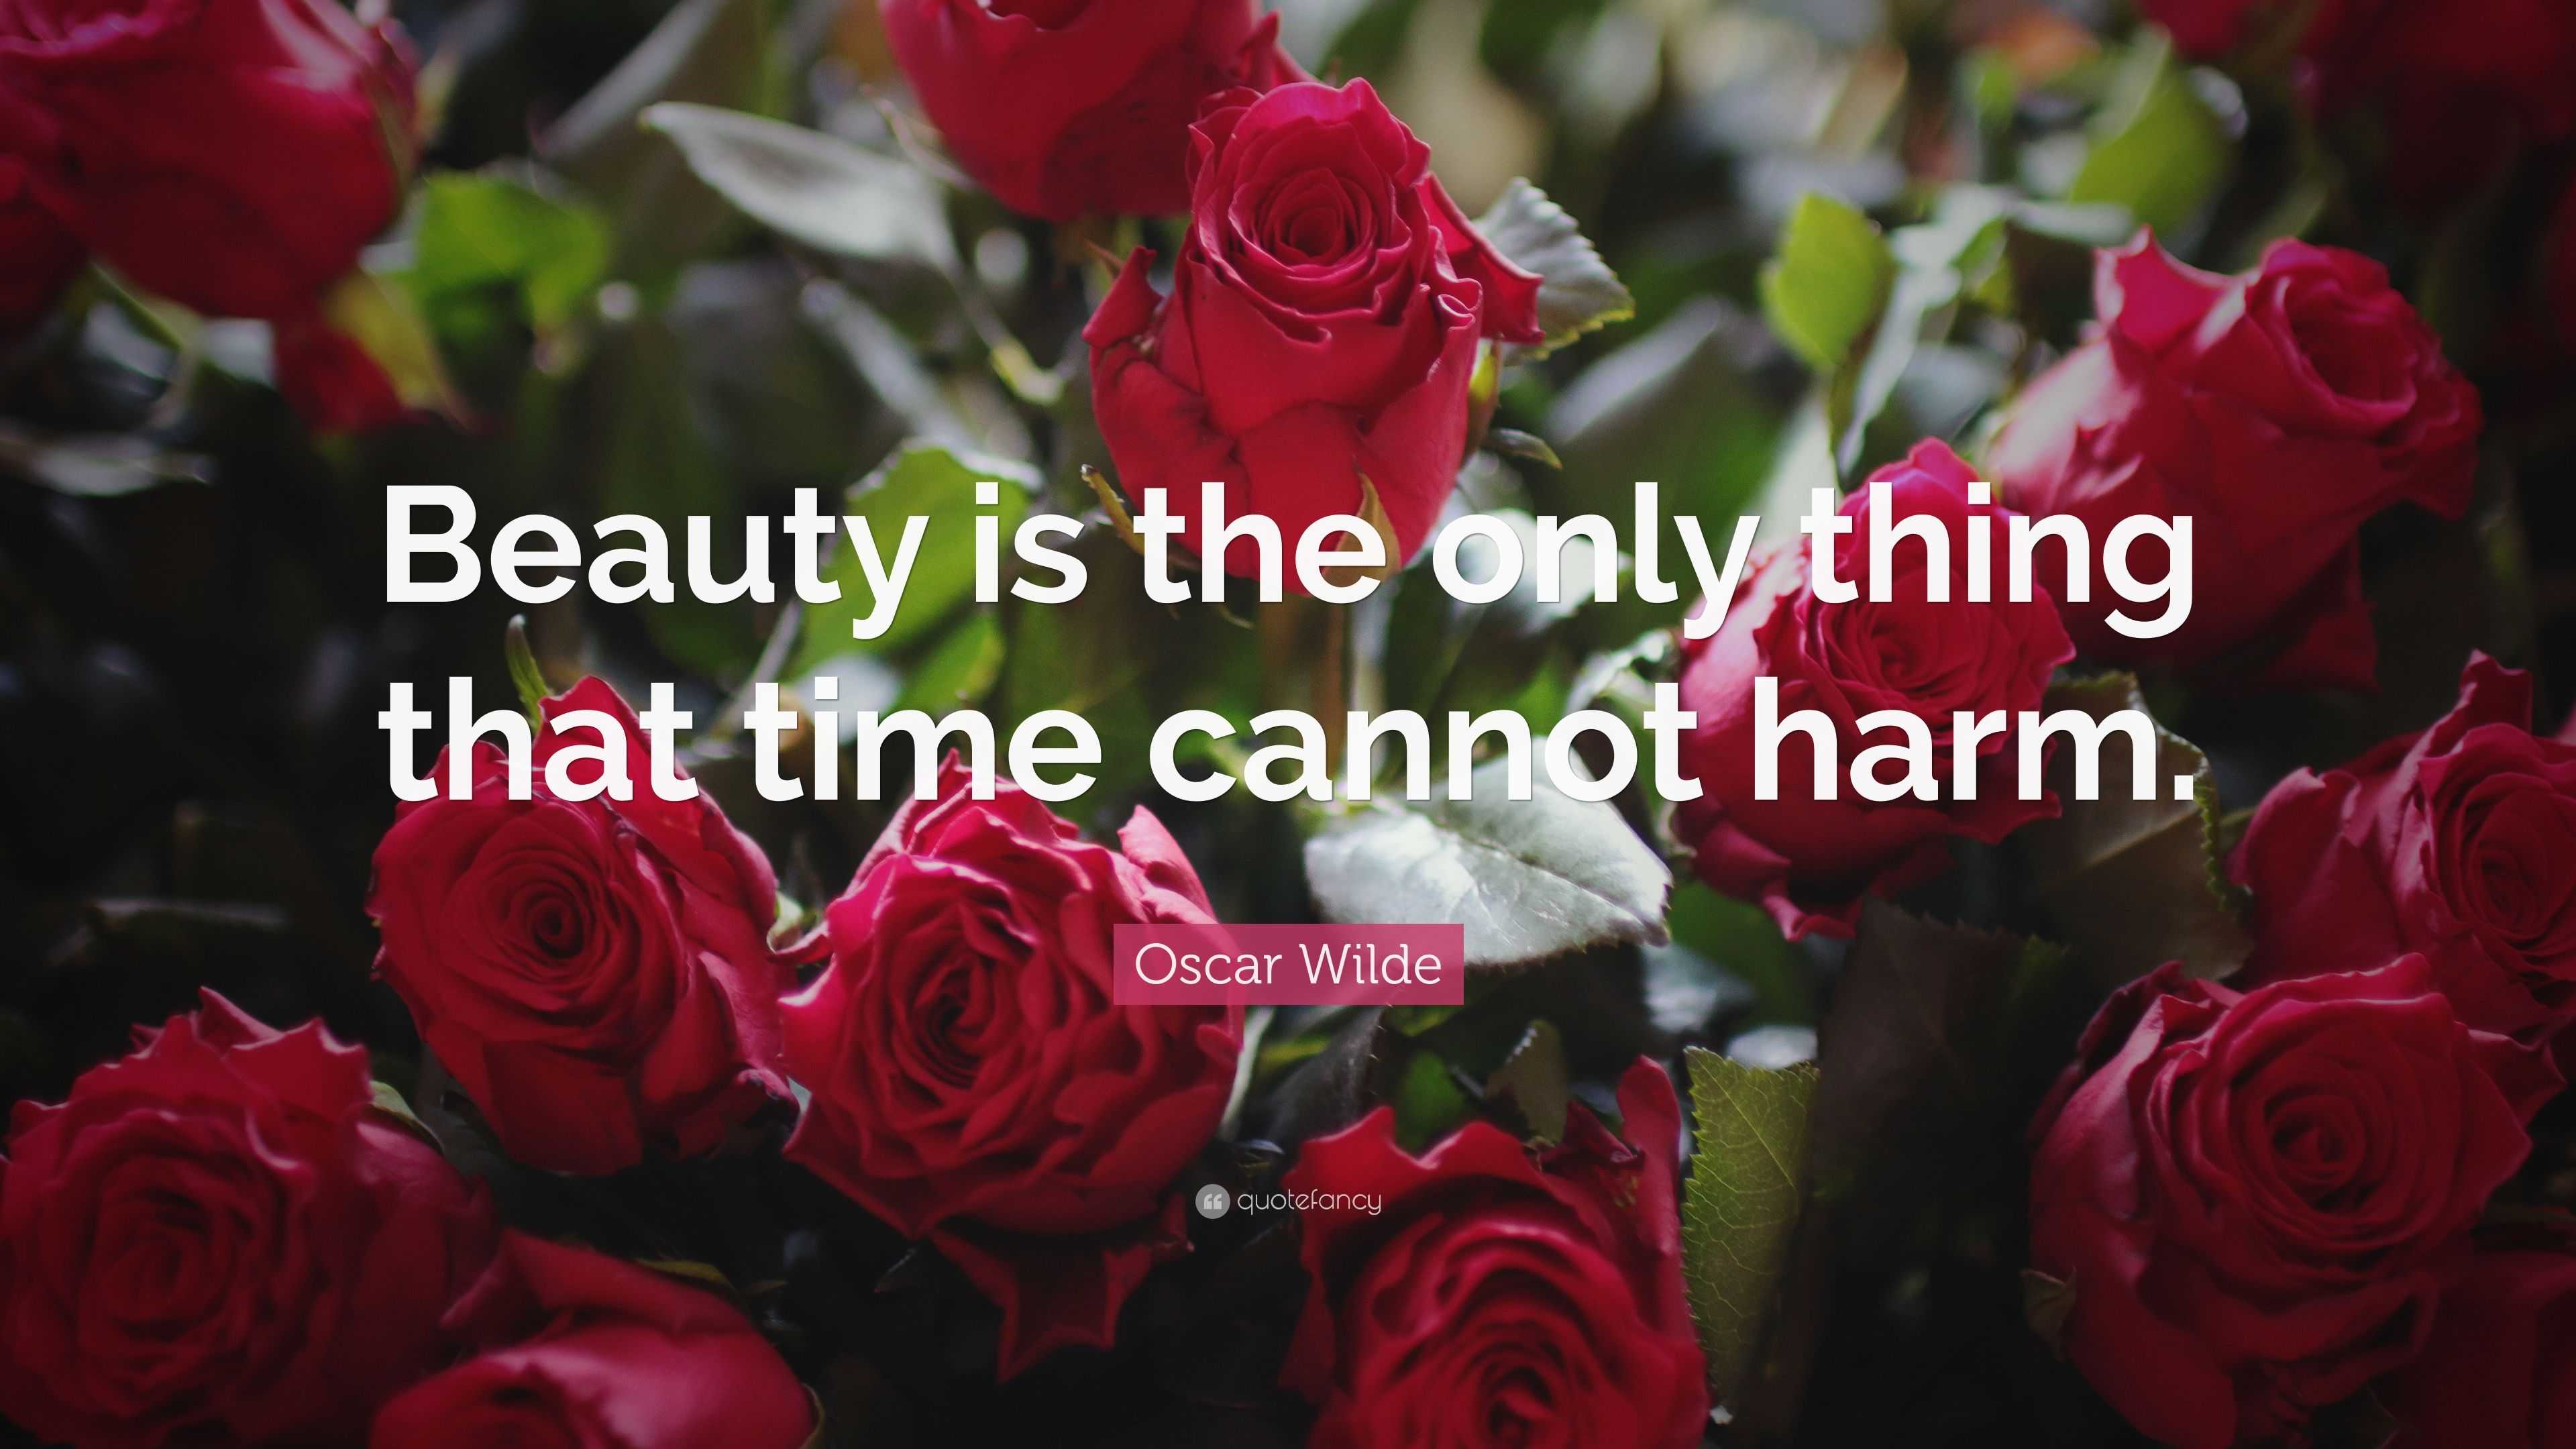 Oscar Wilde Quote: “Beauty is the only thing that time cannot harm.”